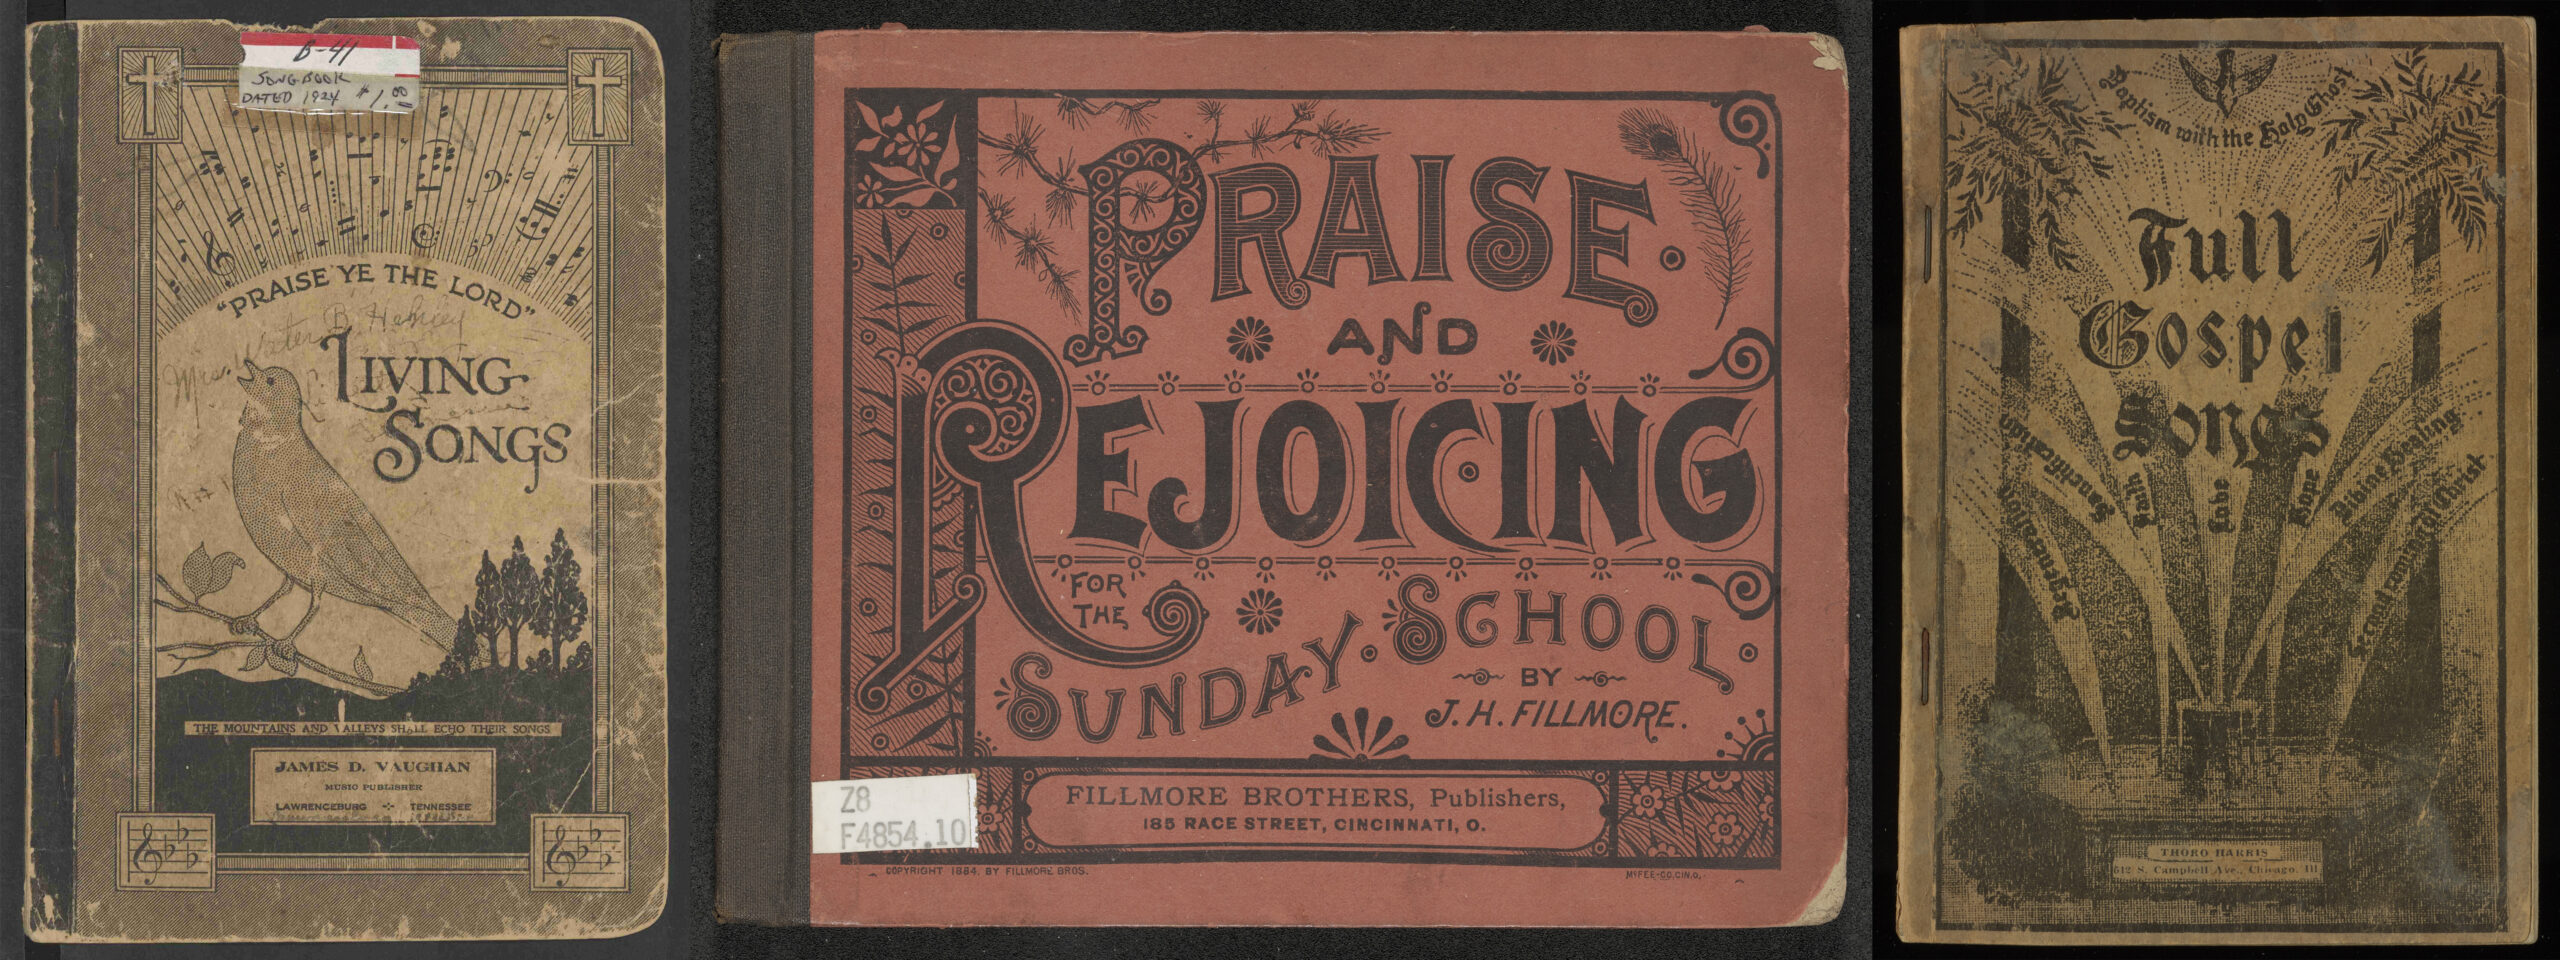 Front covers of Living Songs, Praise and Rejoicing, and Full Gospel Songs